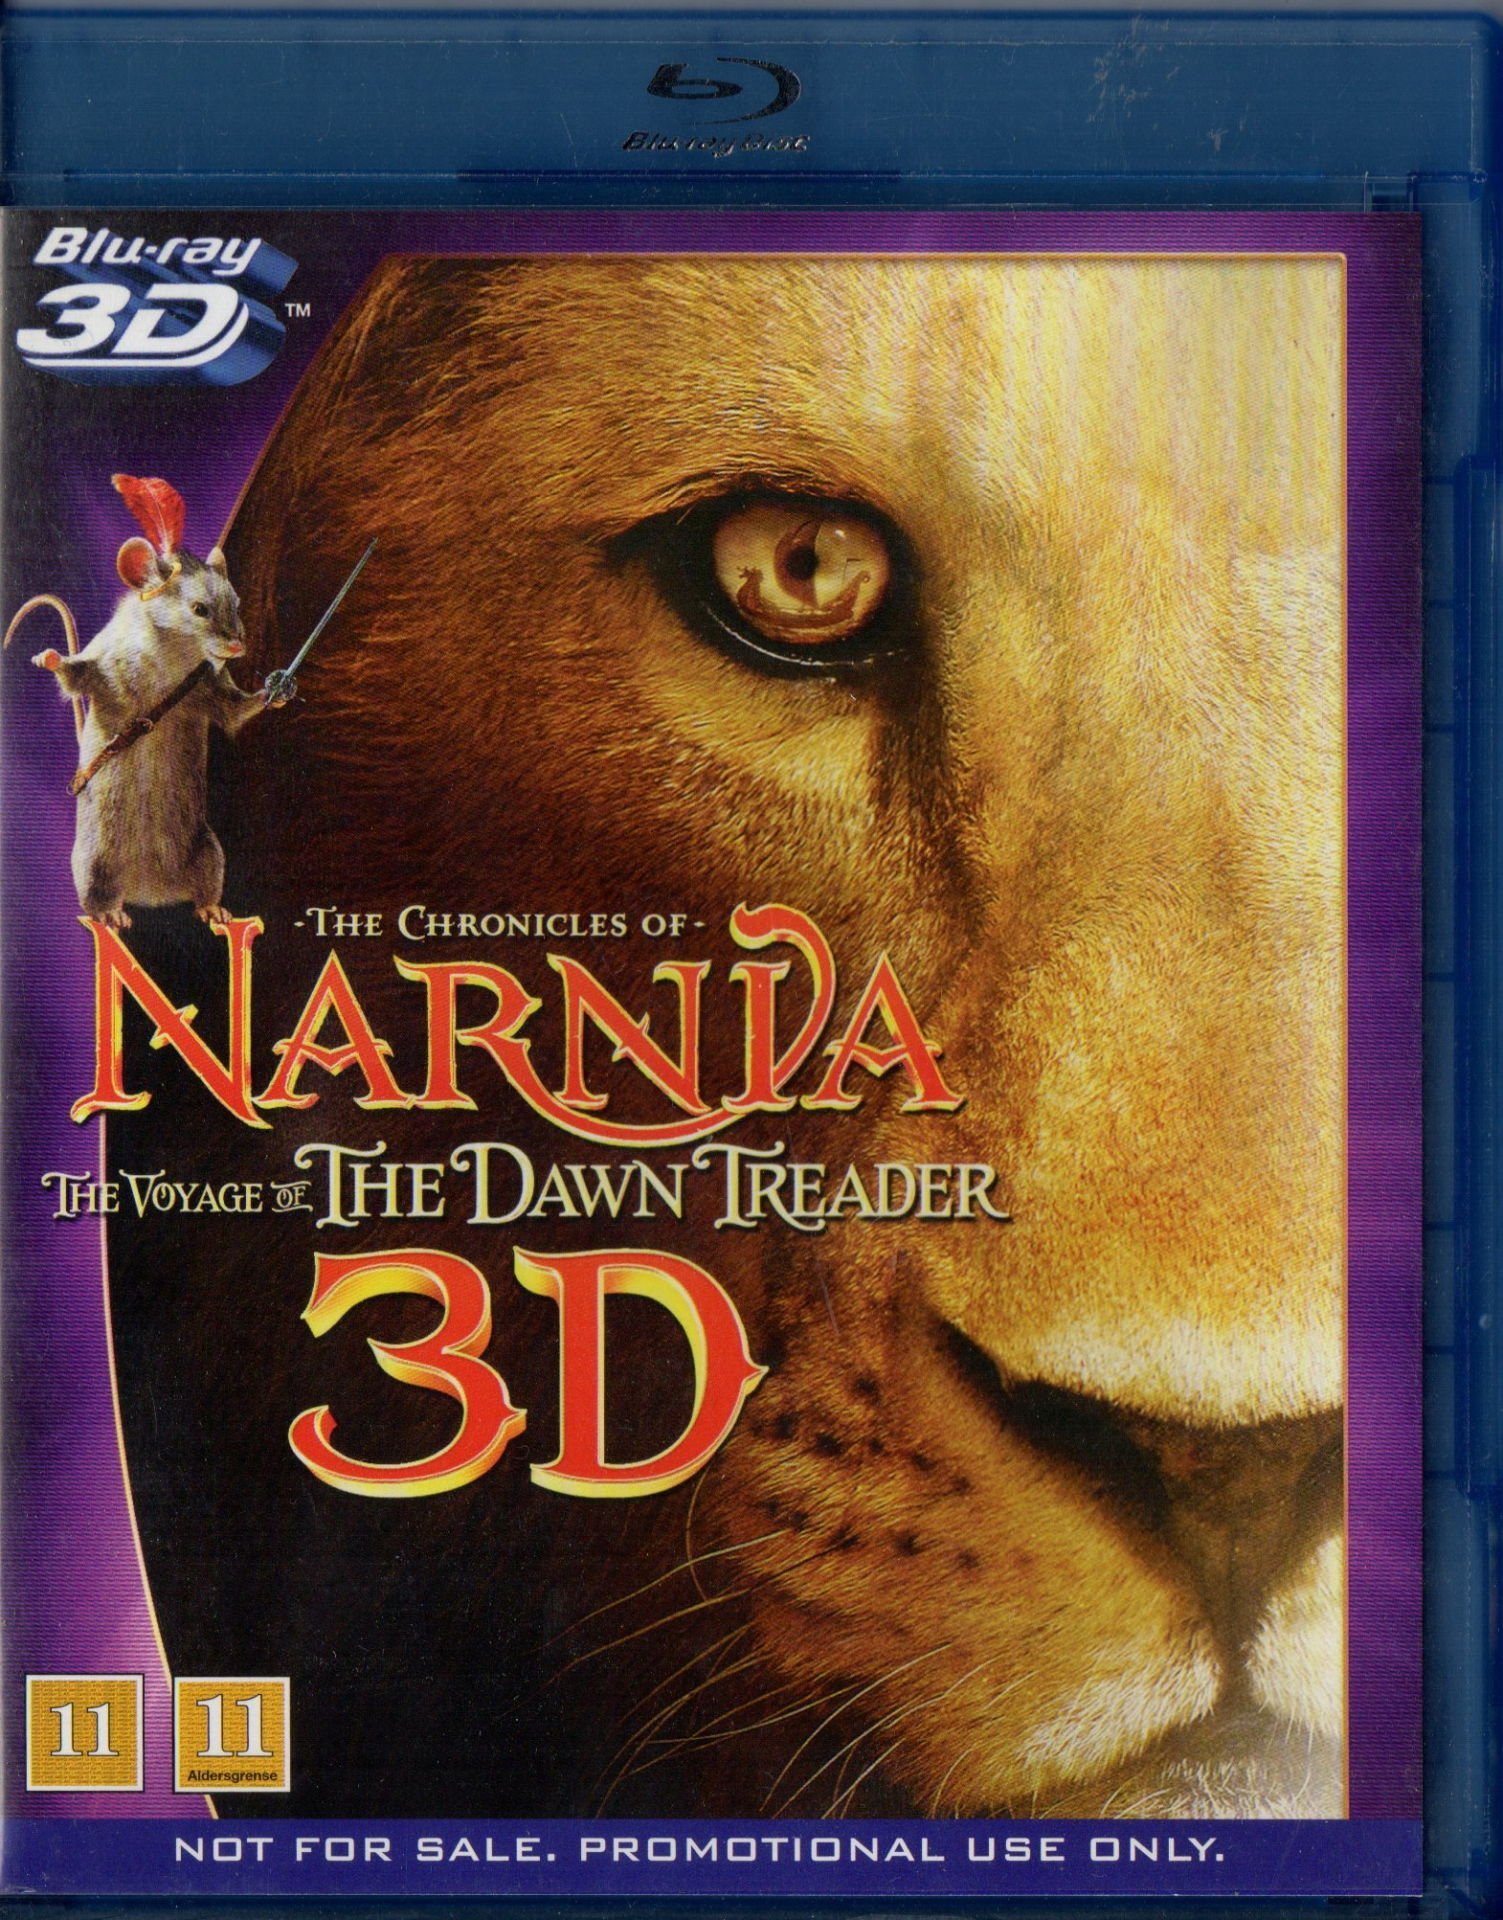 THE CHRONICLES OF NARNIA THE VOYAGE OF THE DAWN TREADER - MICHAEL APTED - 3D BLU-RAY 2.EL